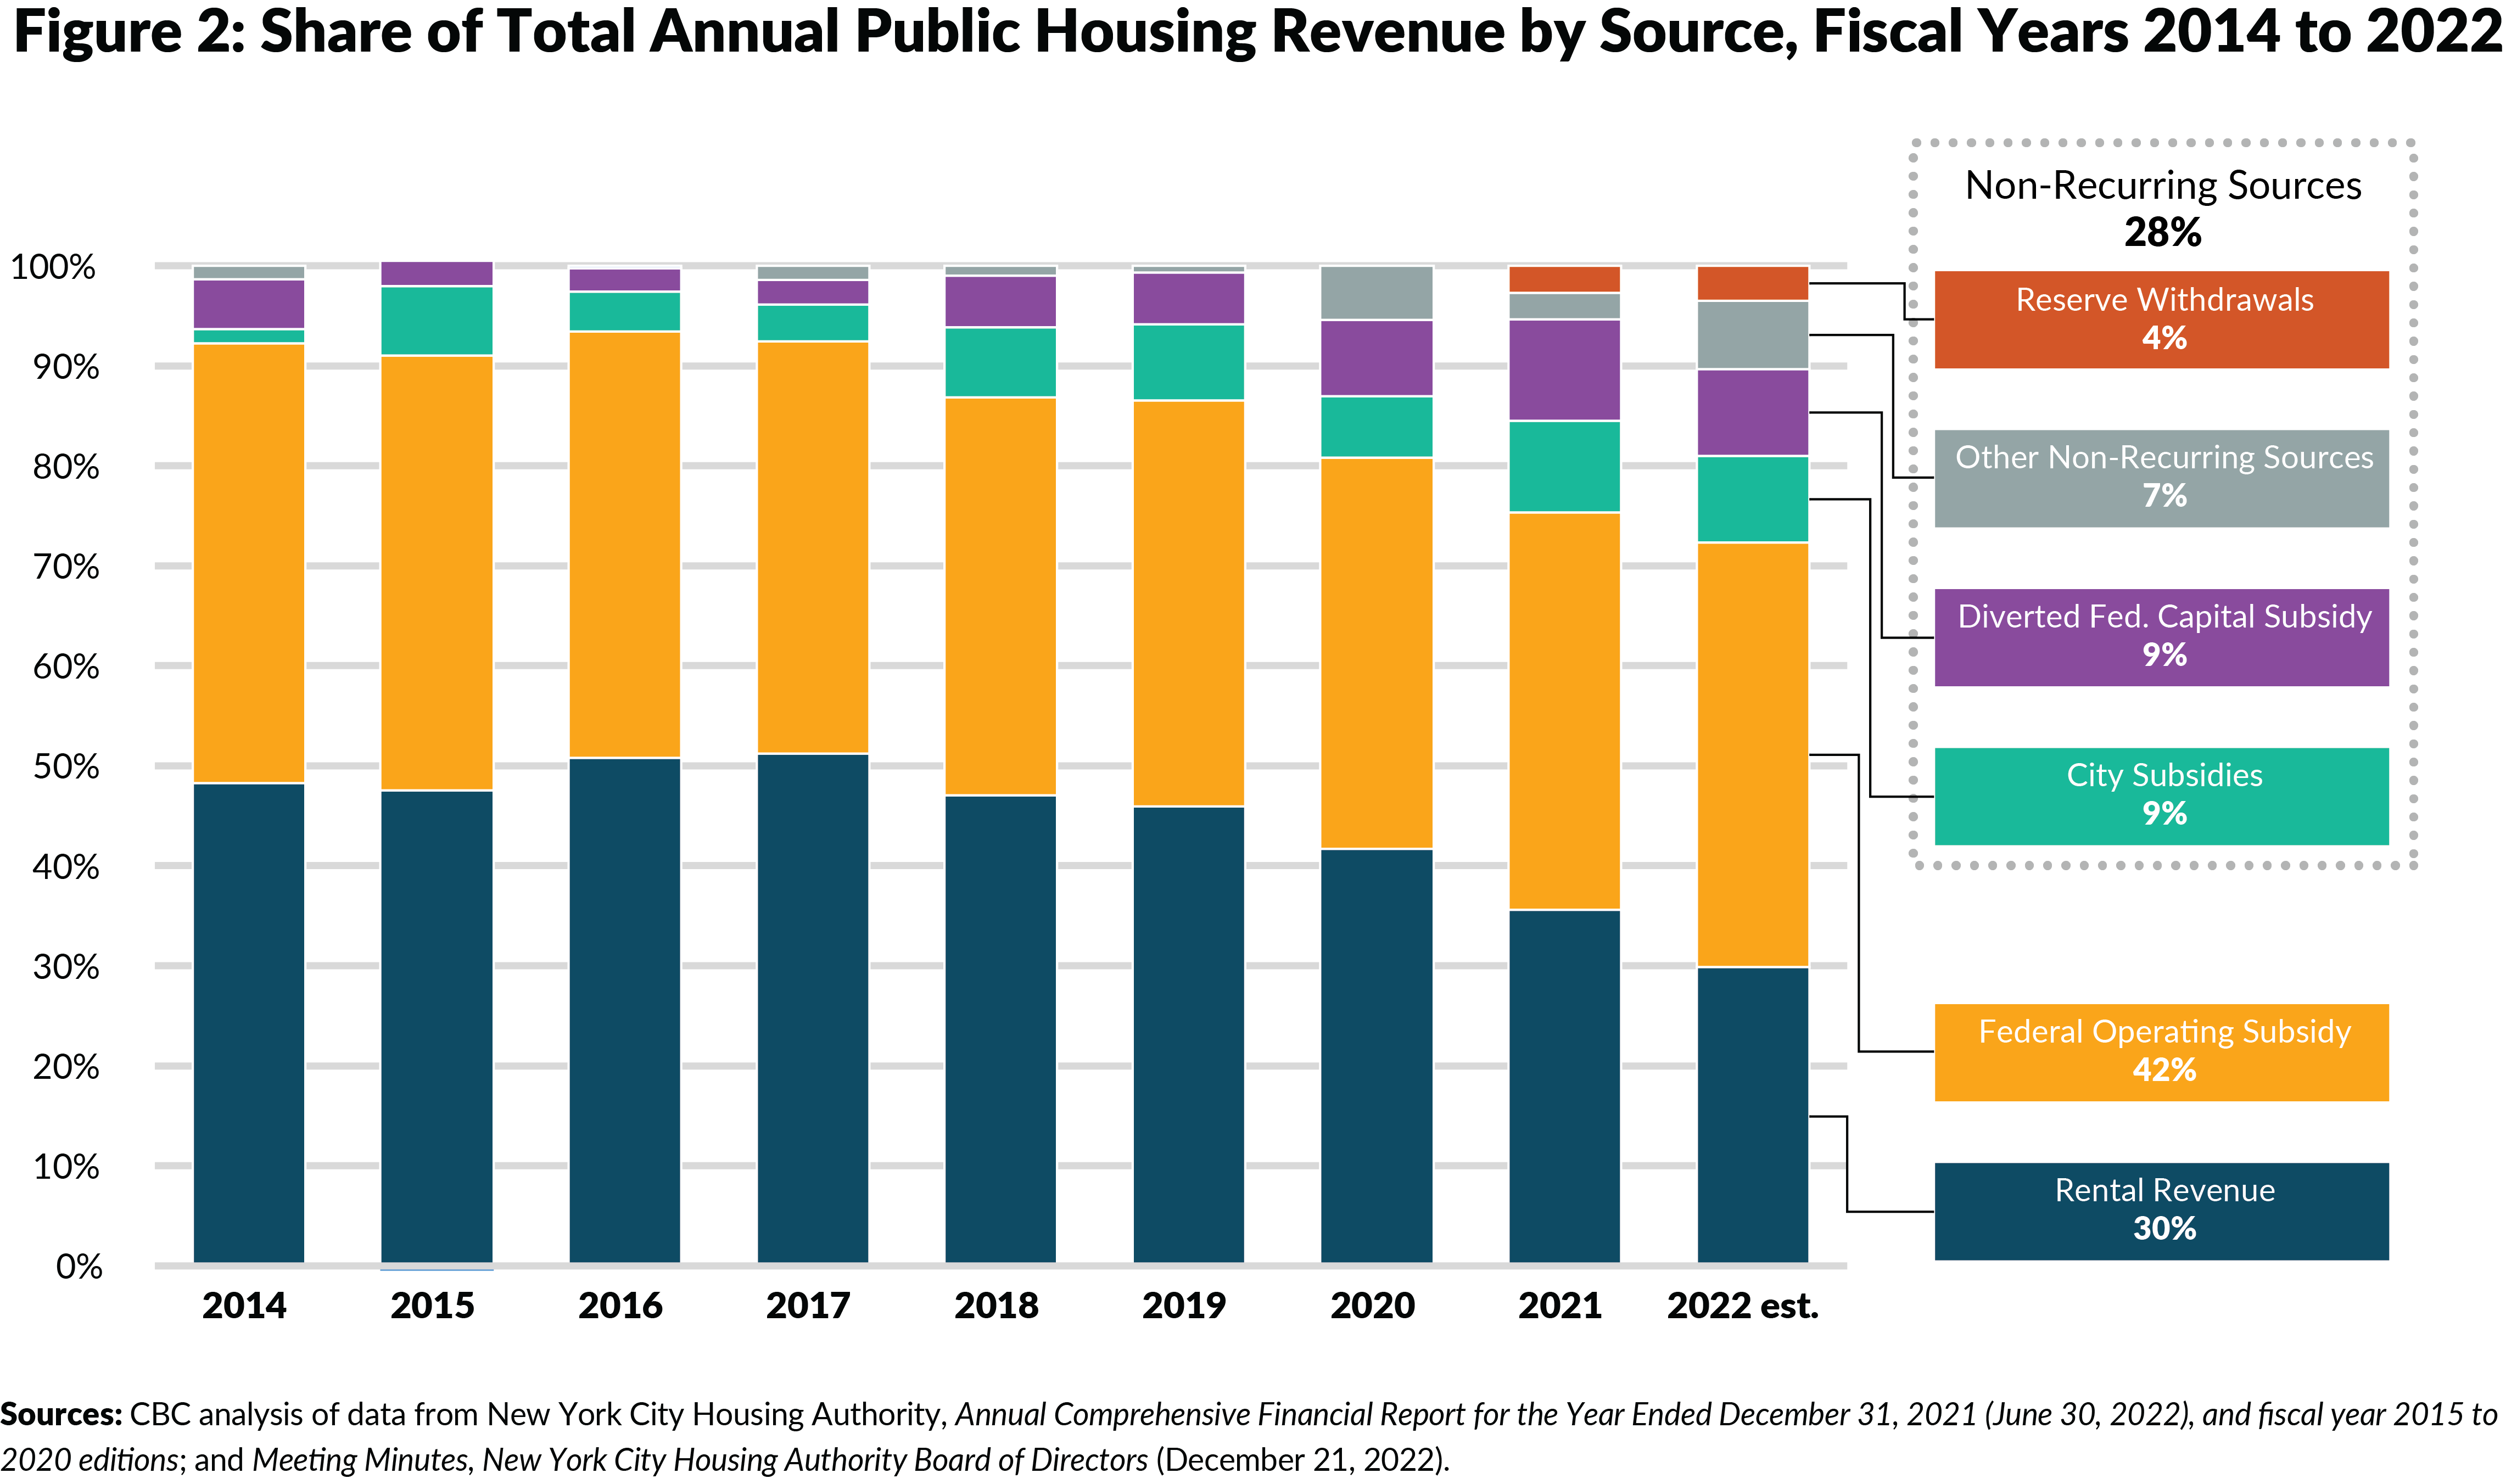 Figure 2: Share of Total Annual Public Housing Revenue by Source, Fiscal Years 2014 to 2022